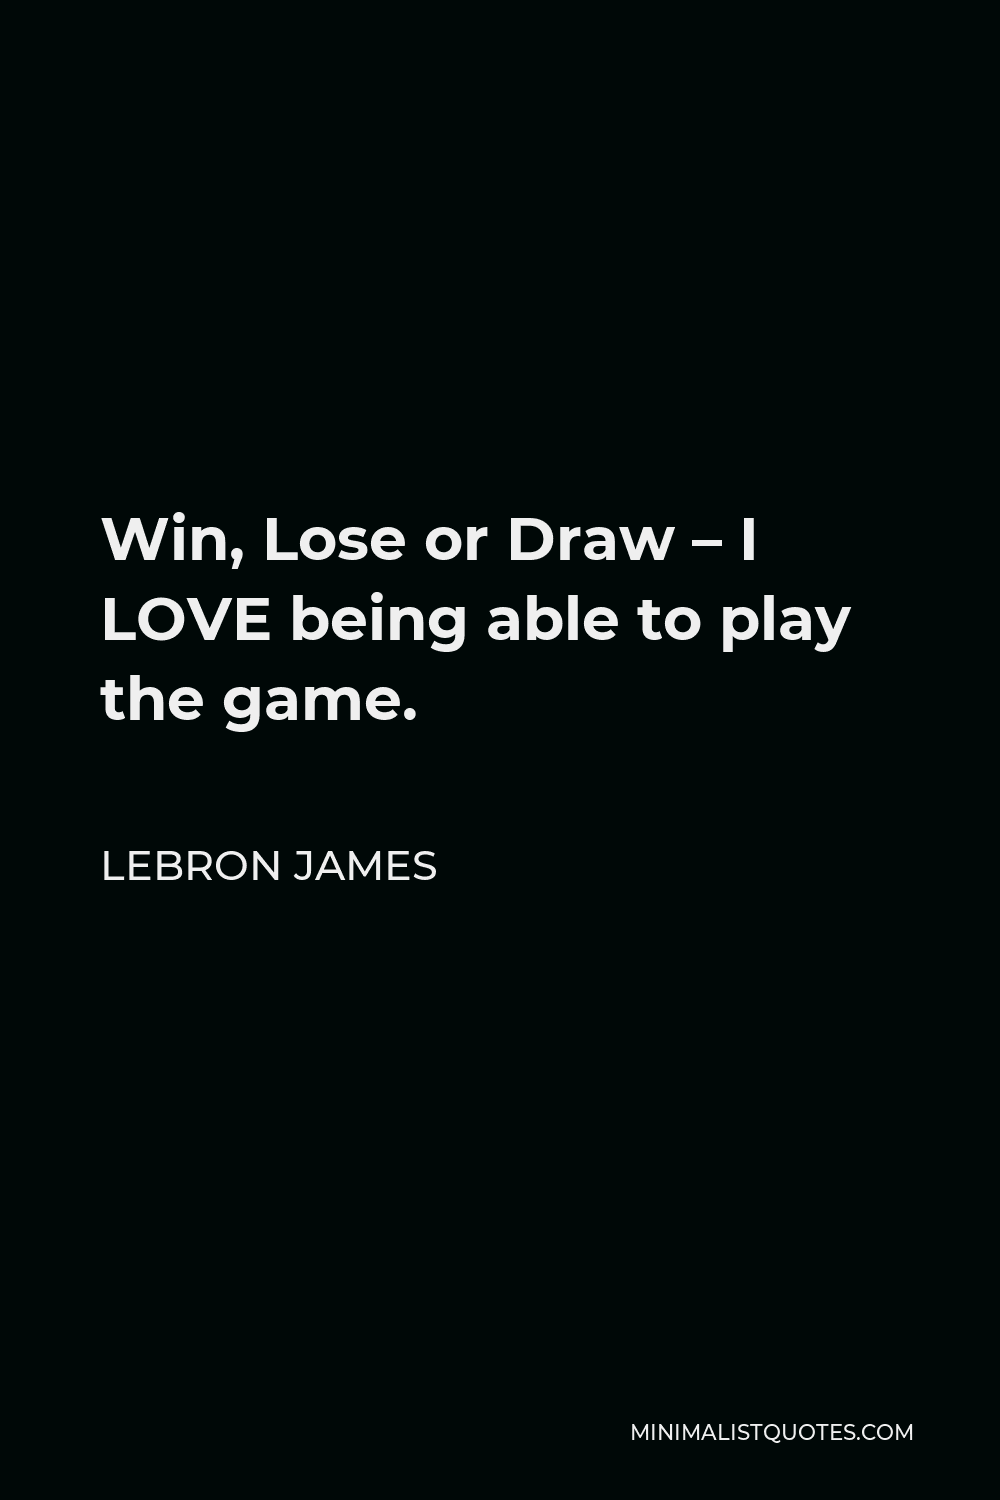 Lebron James Quote Win Lose Or Draw I Love Being Able To Play The Game